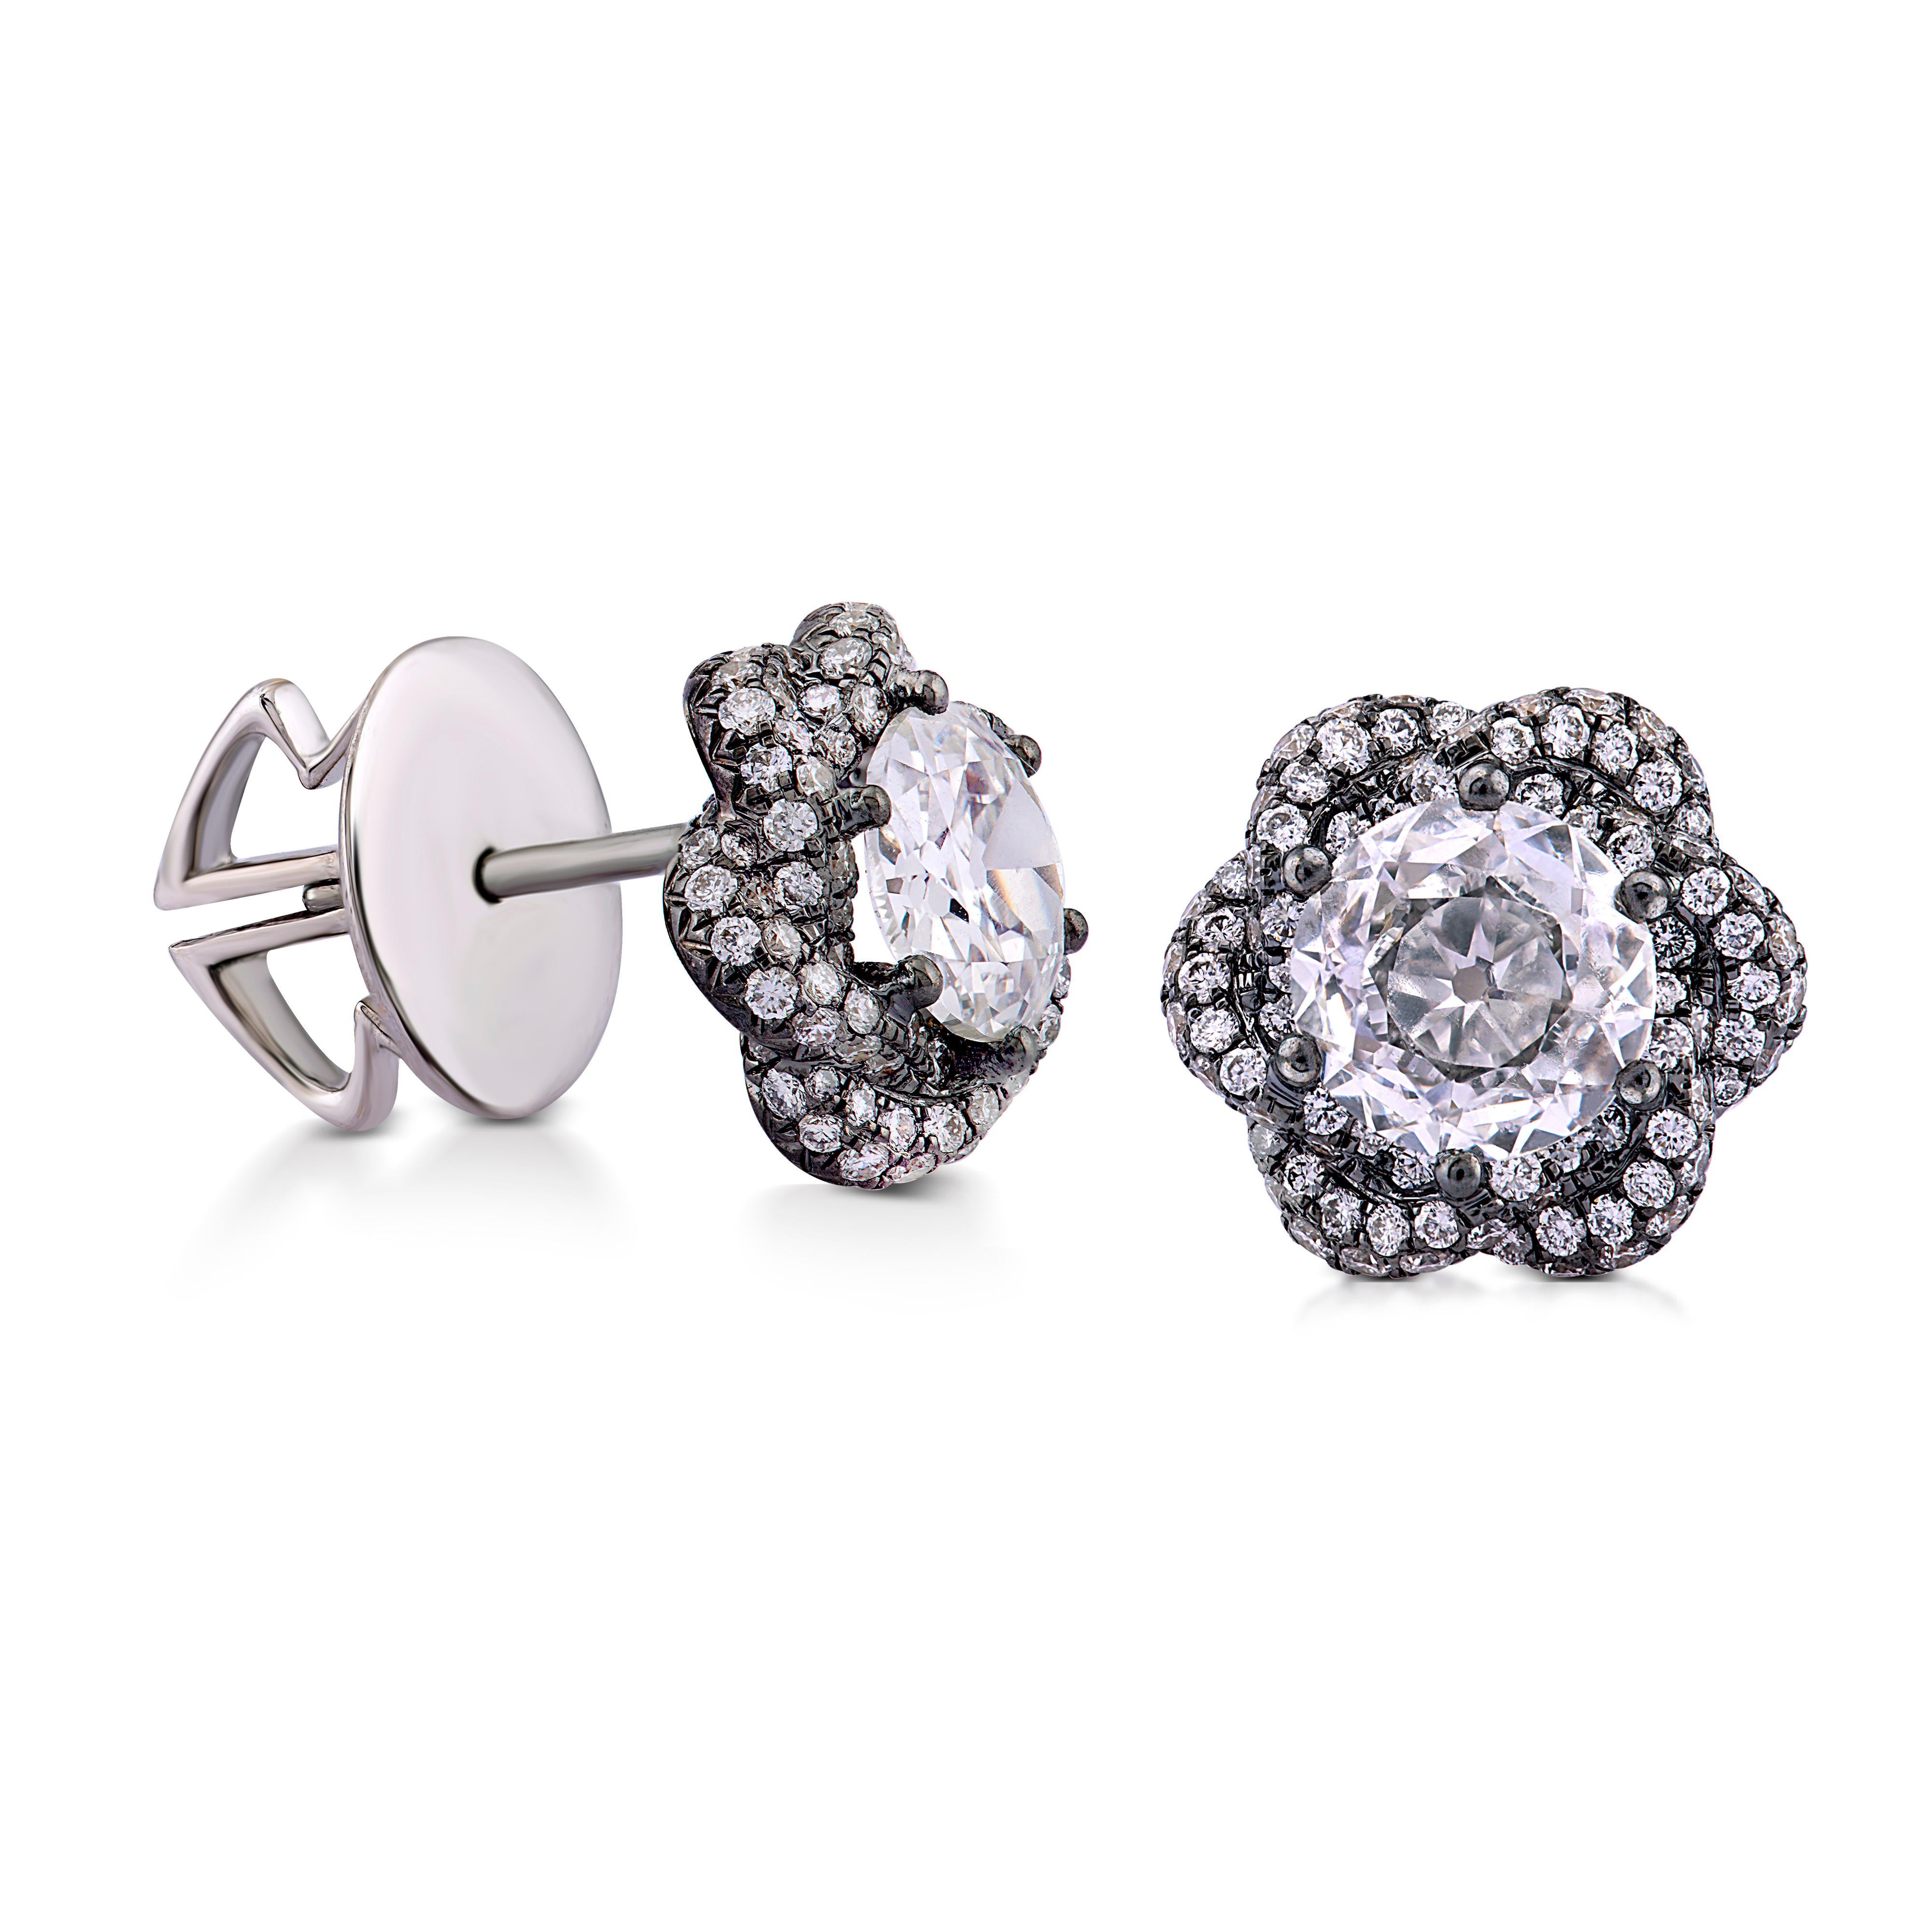 Classic yet modern, these ear studs play with the antique romance of two round old cut diamonds, totalling 1.37cts, showcasing them in a contemporary setting. The black rhodium gives an edginess to these otherwise feminine studs, which are softened